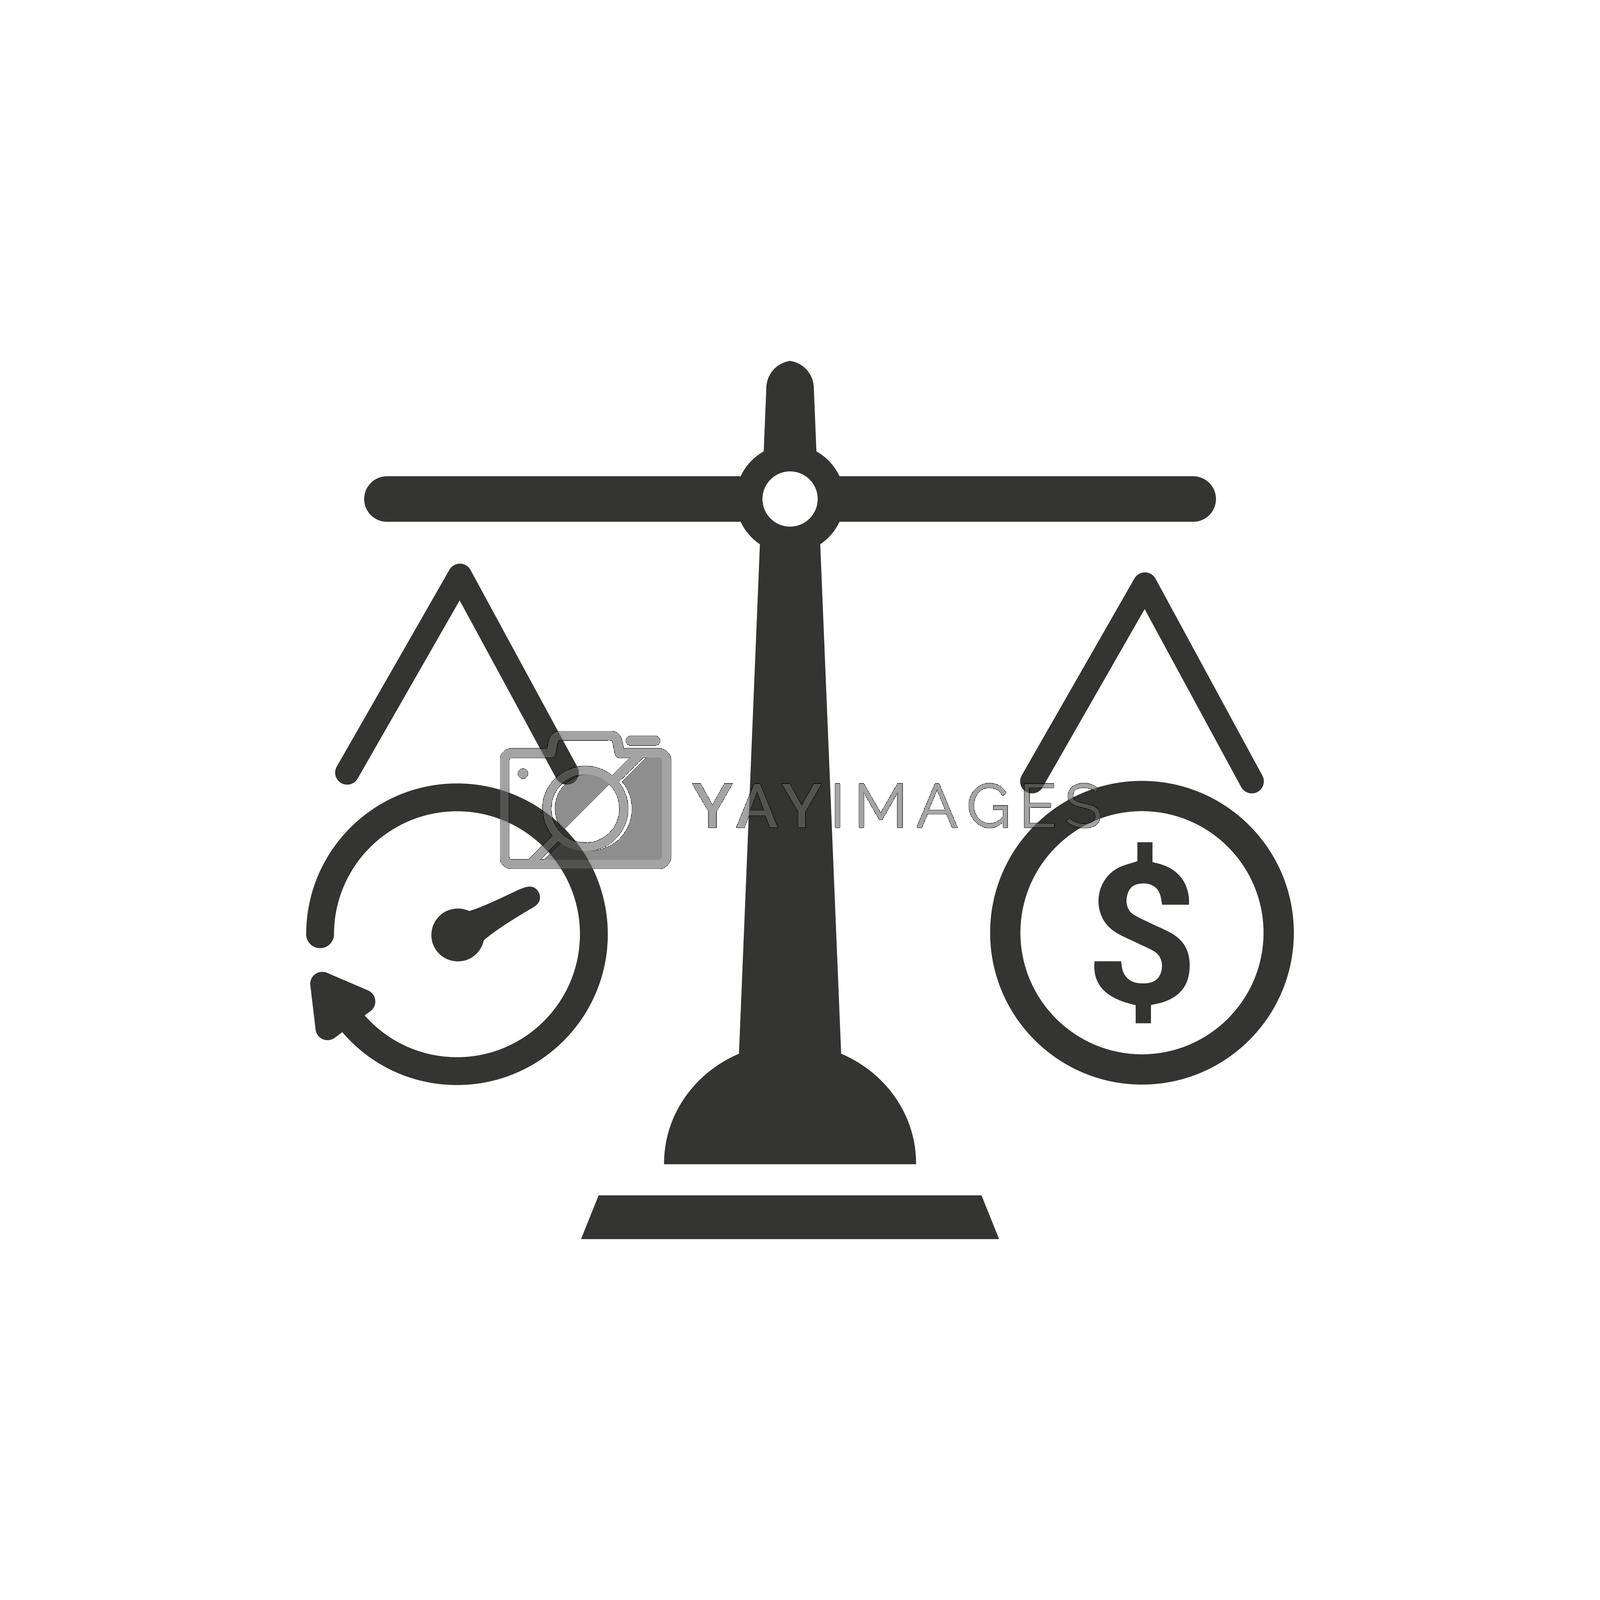 Royalty free image of Budget Estimate Icon by delwar018